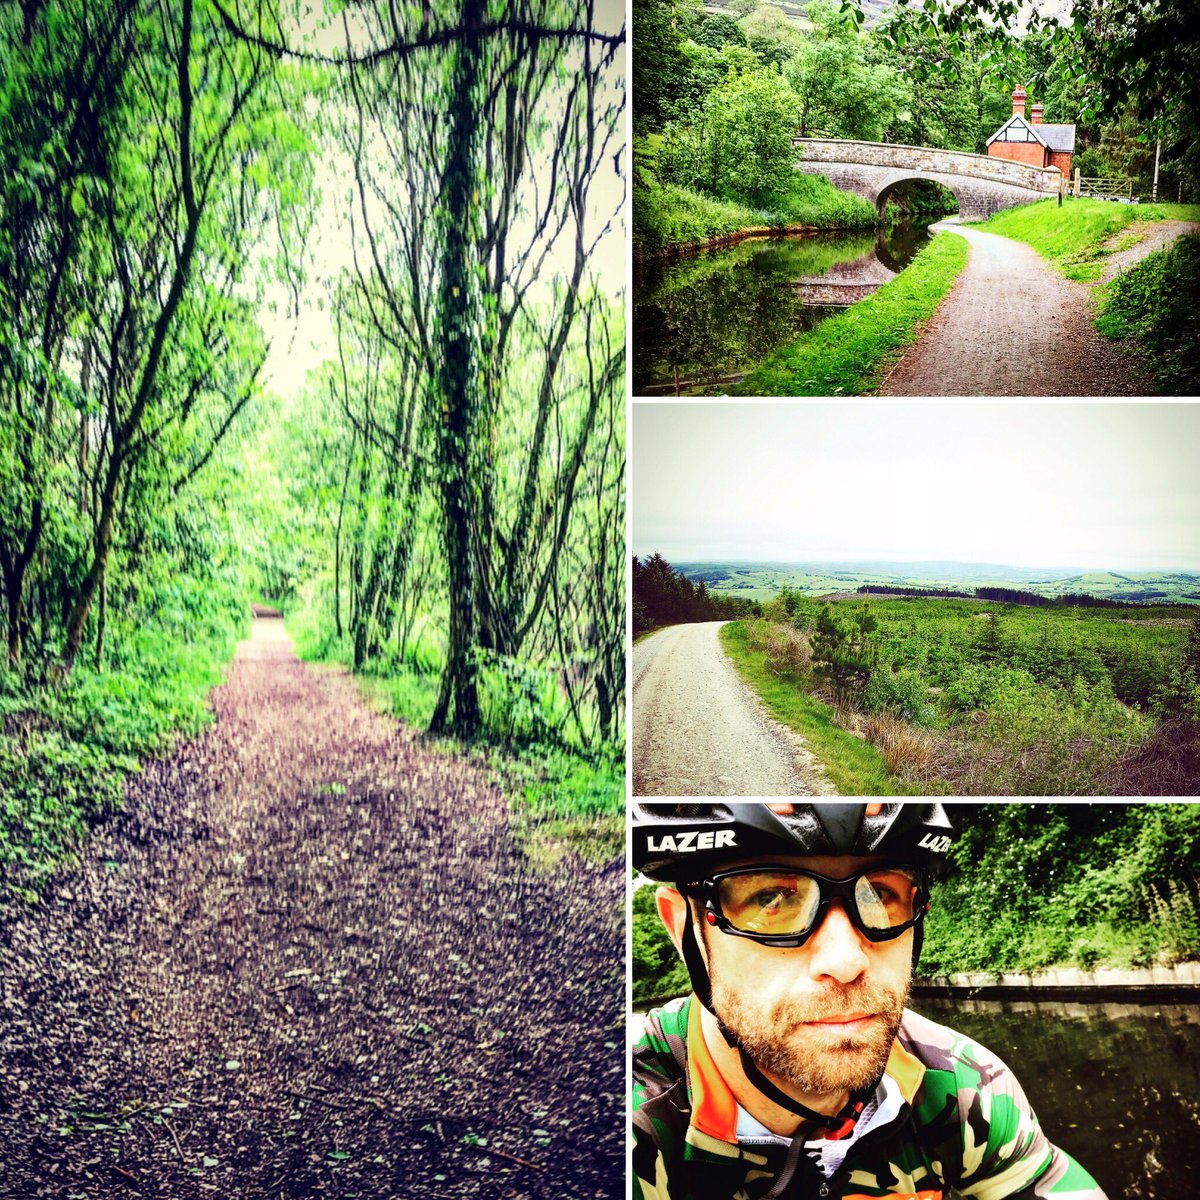 Morning ride out on the trails. #oneplanetadventure #llangollencanal #leadmines #gravelride #cycling #fitness #selfie